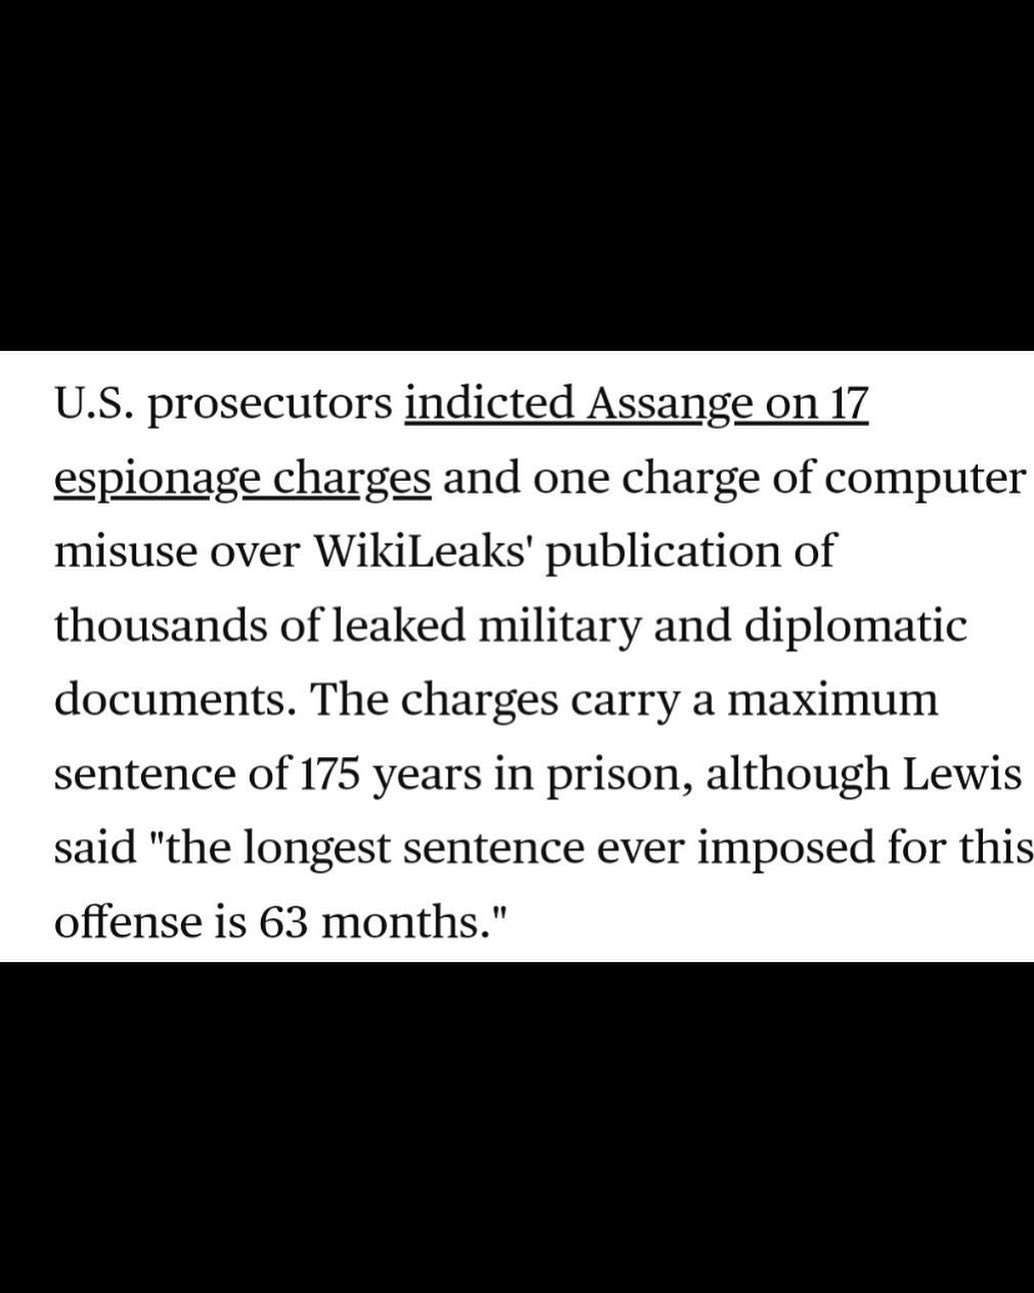 You are currently viewing U.S. prosecutors indicted Assange on 17 espionage charges and one charge of computer misuse over WikiLeaks’ publication of thousands of leaked military and diplomatic documents.